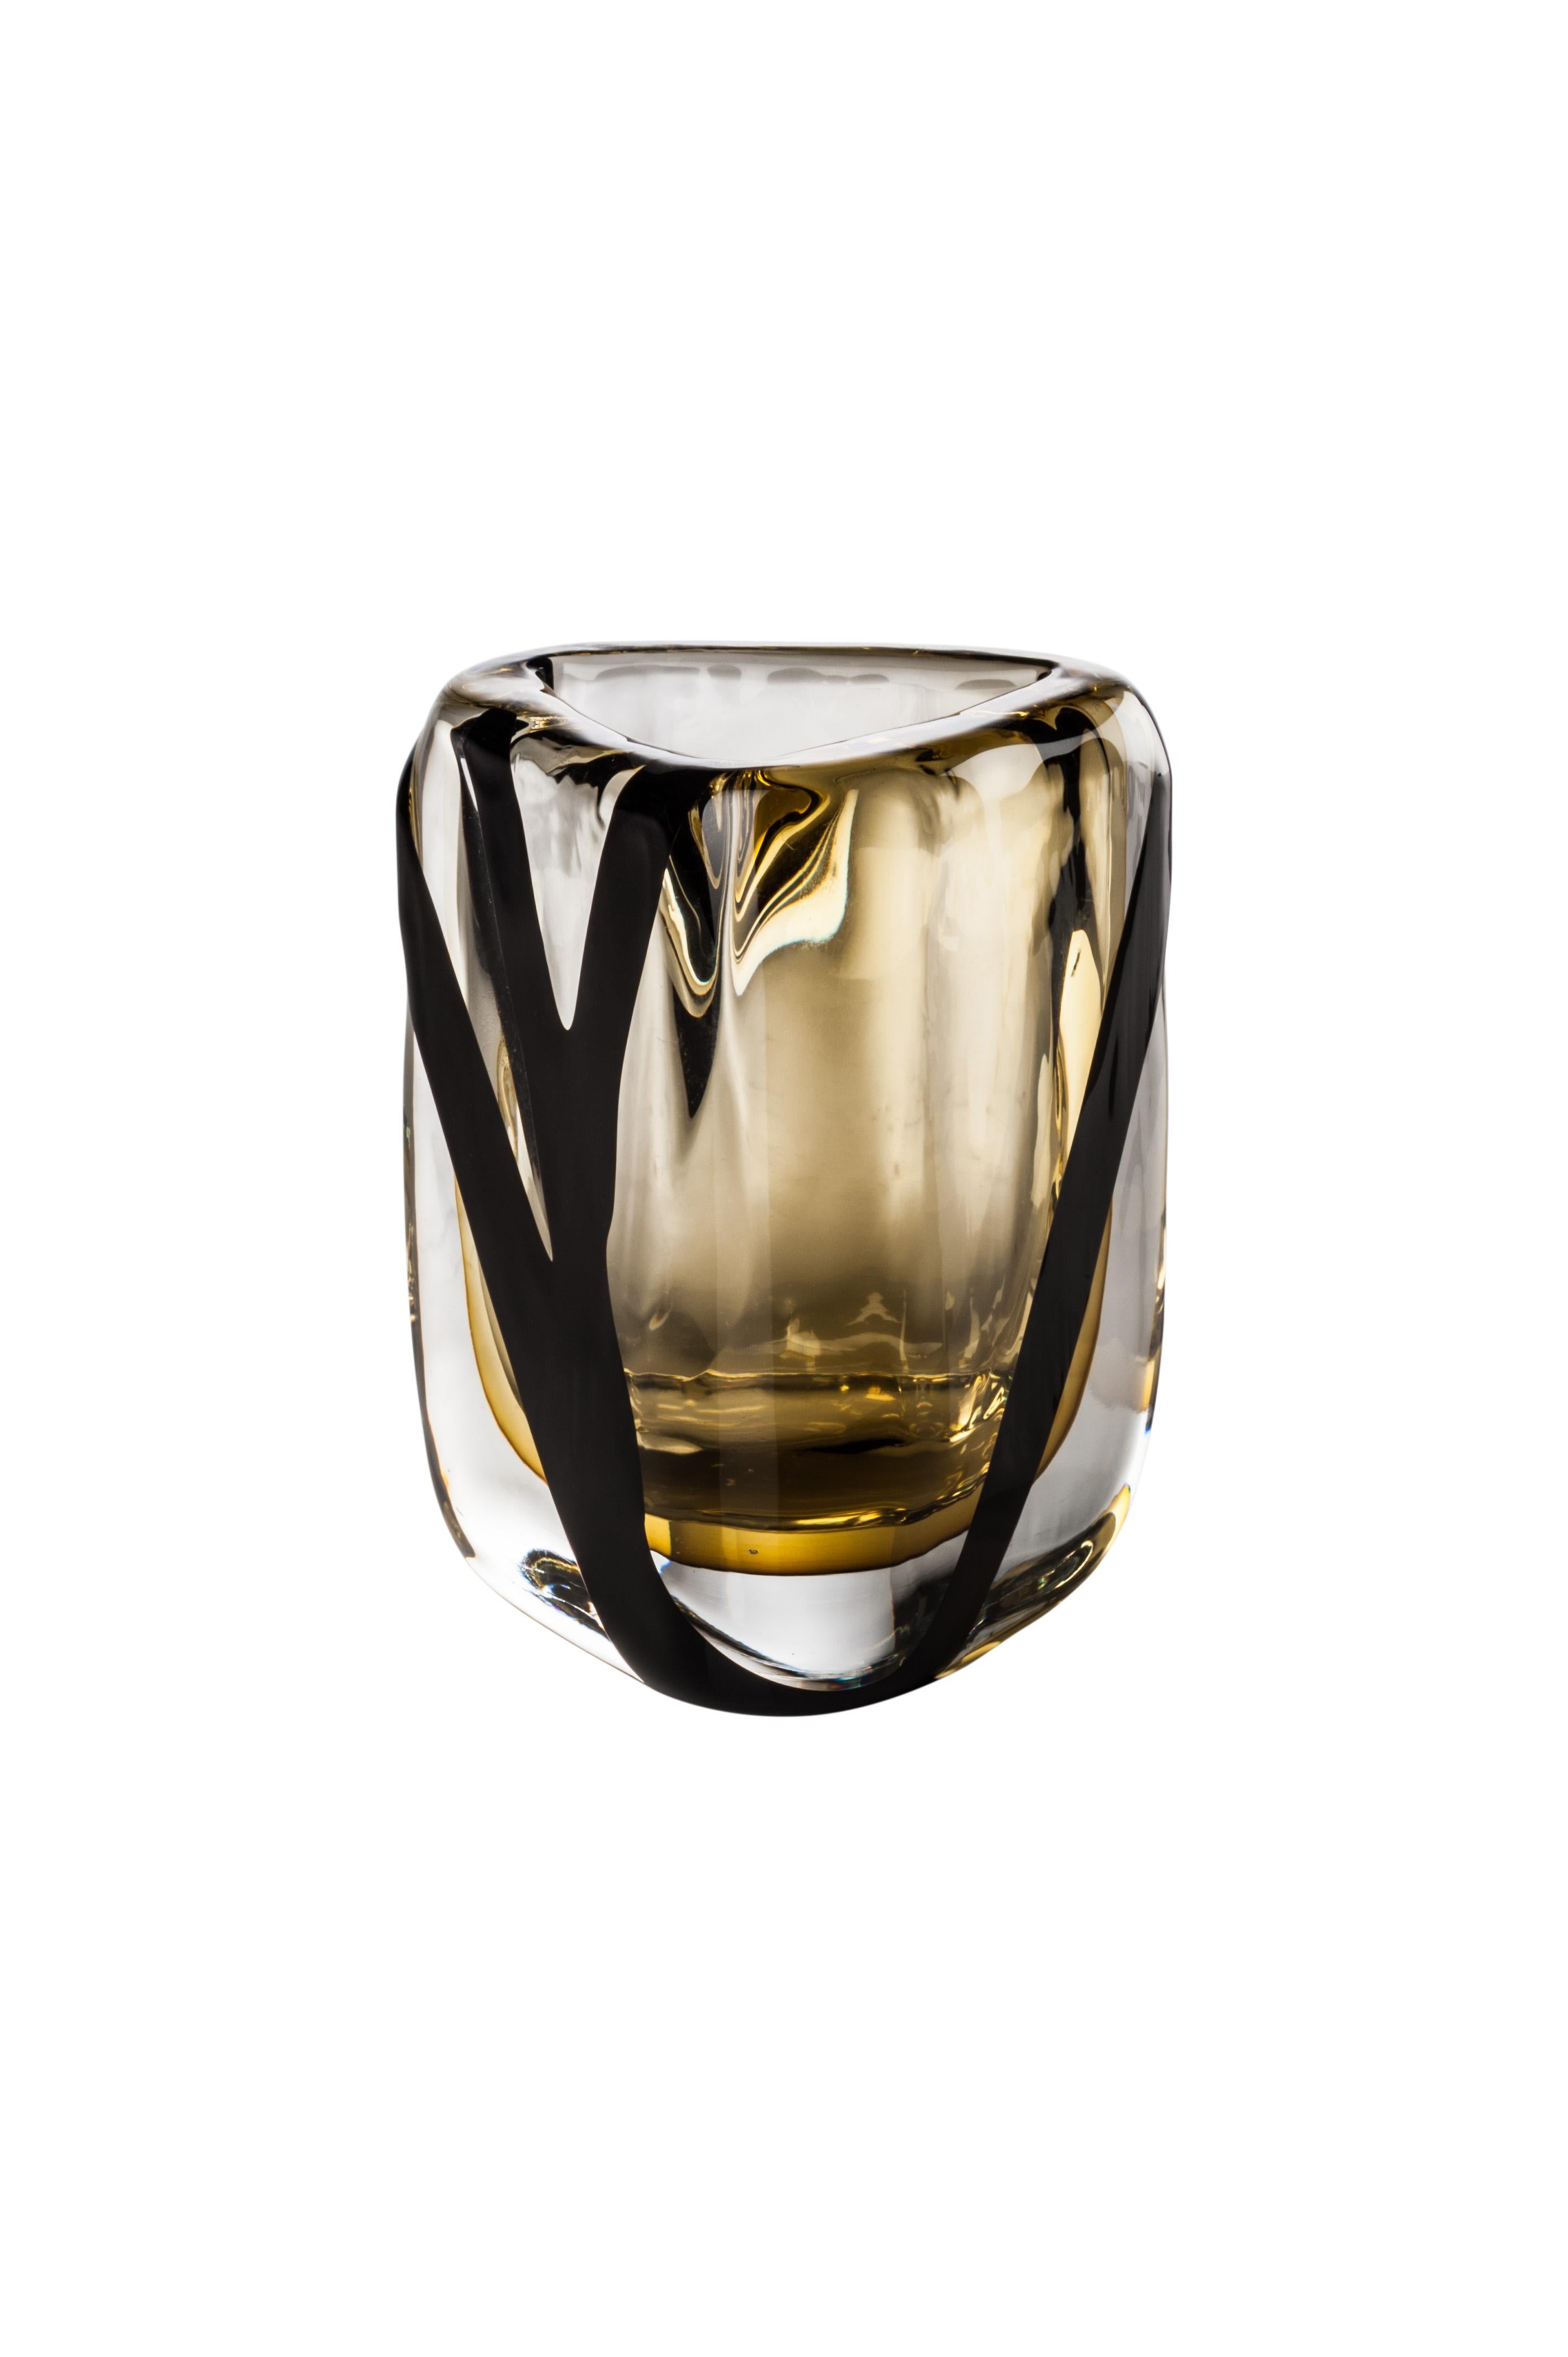 Venini glass vase in transparent crystal and tea with black decoration designed by Peter Marino in 2017. Perfect for indoor home decor as container or statement piece for any room. Also available in other colors on 1stdibs. Limited edition of only